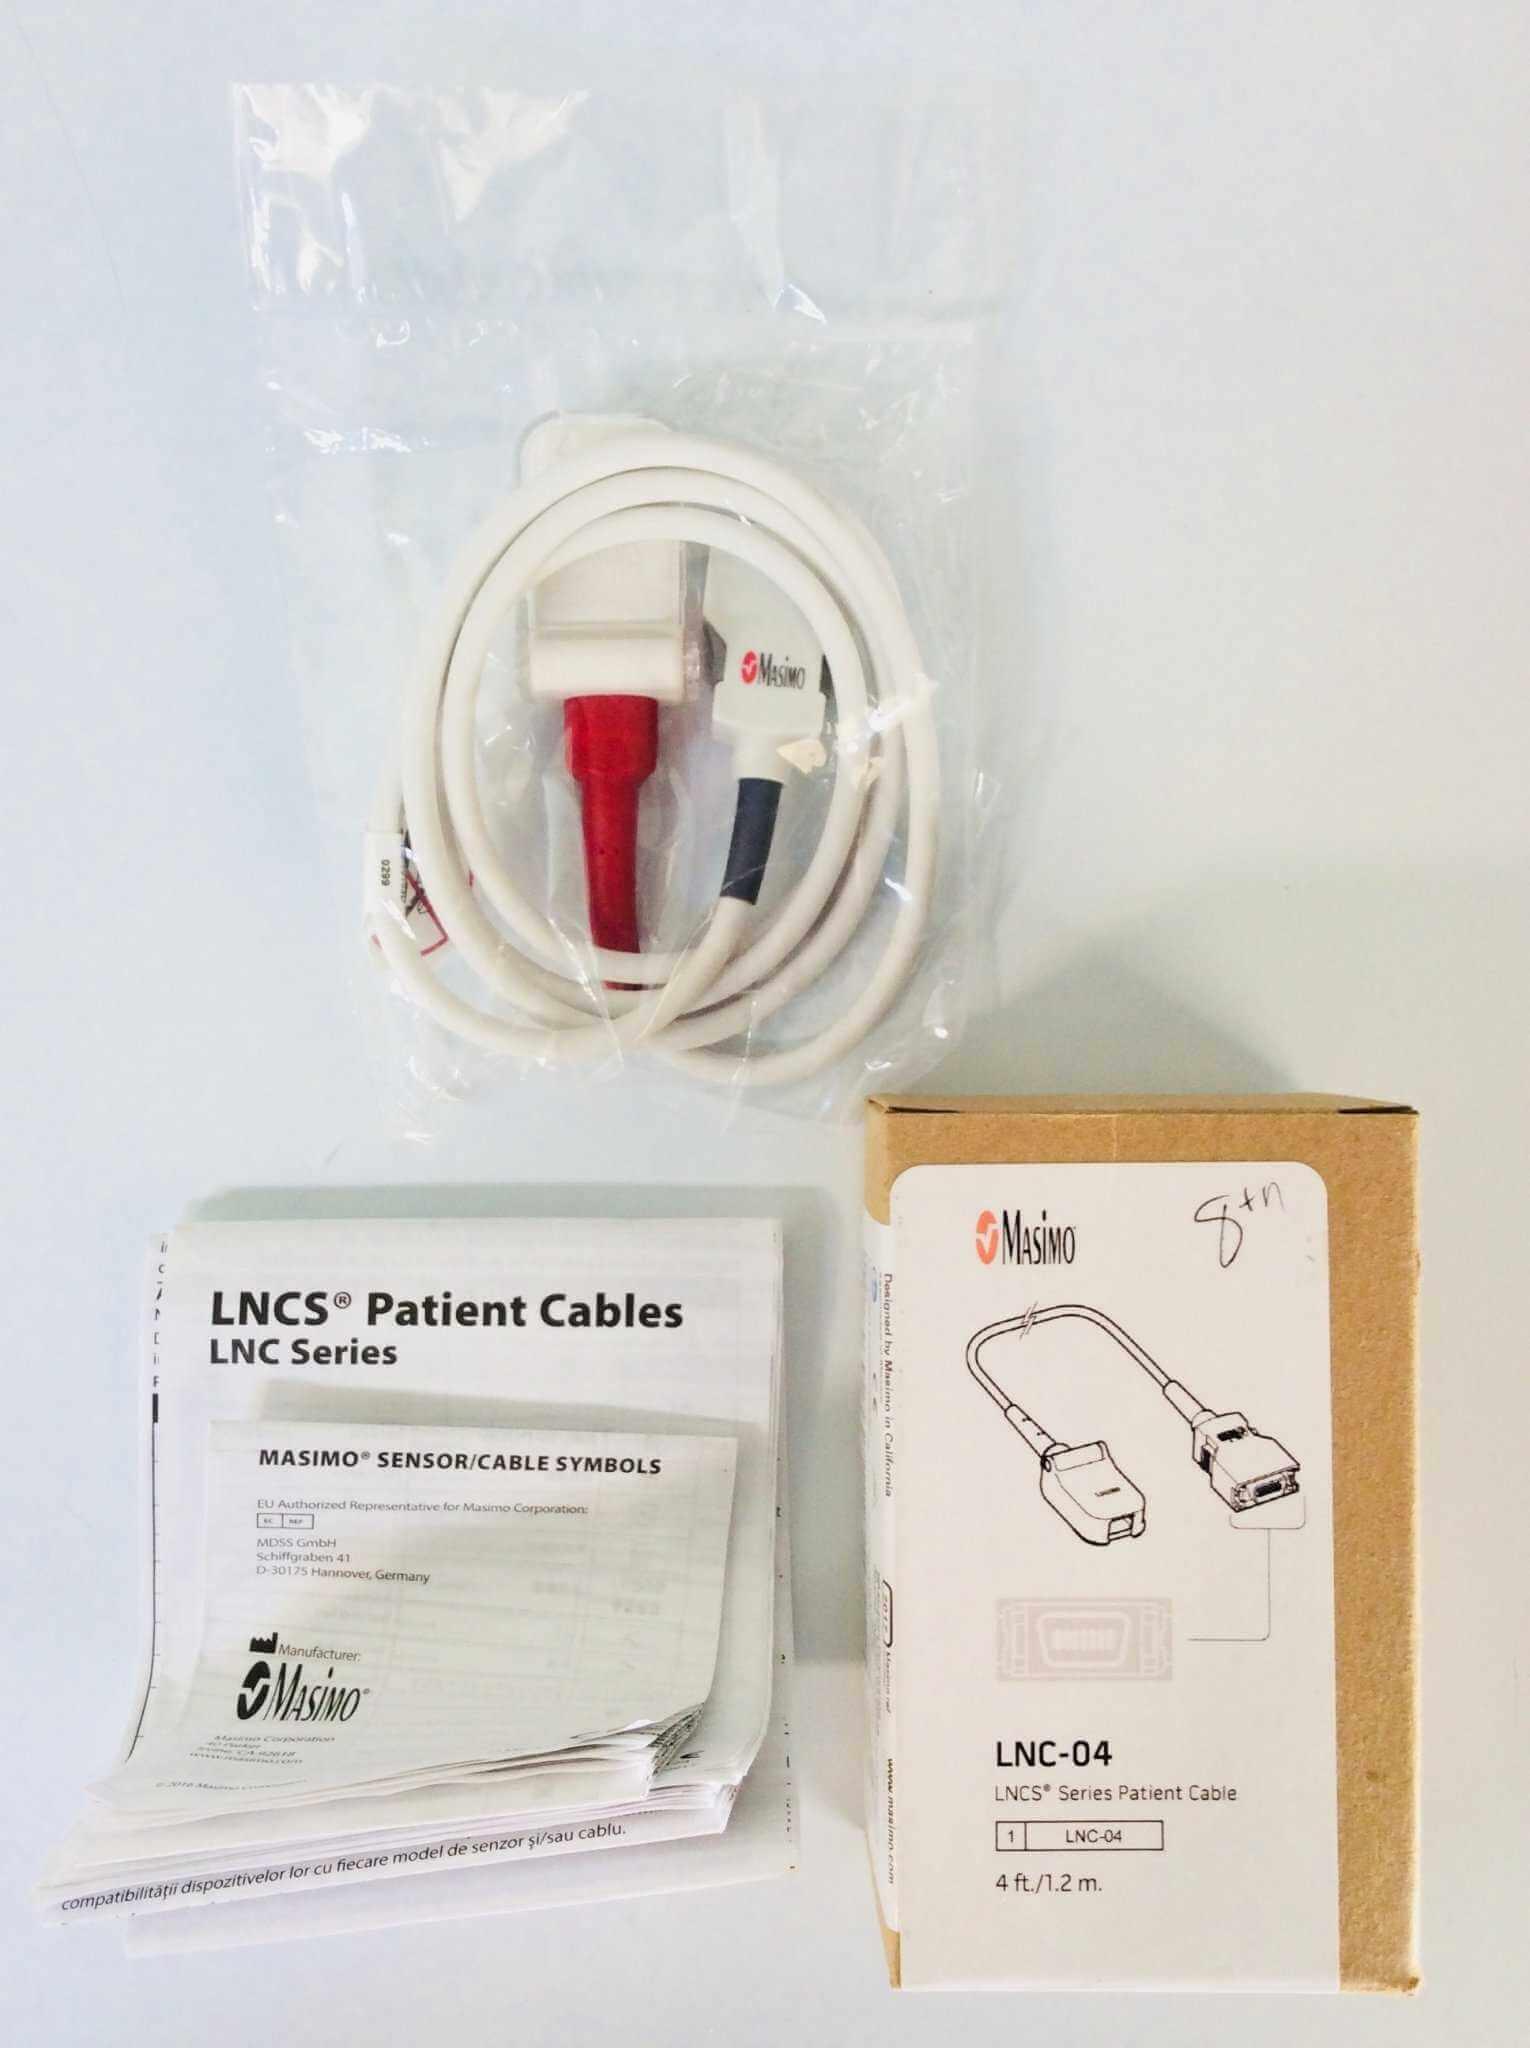 NEW Masimo LNCS Series 4' FT Patient Cable LNC-04 2017 Warranty FREE Shipping - MBR Medicals